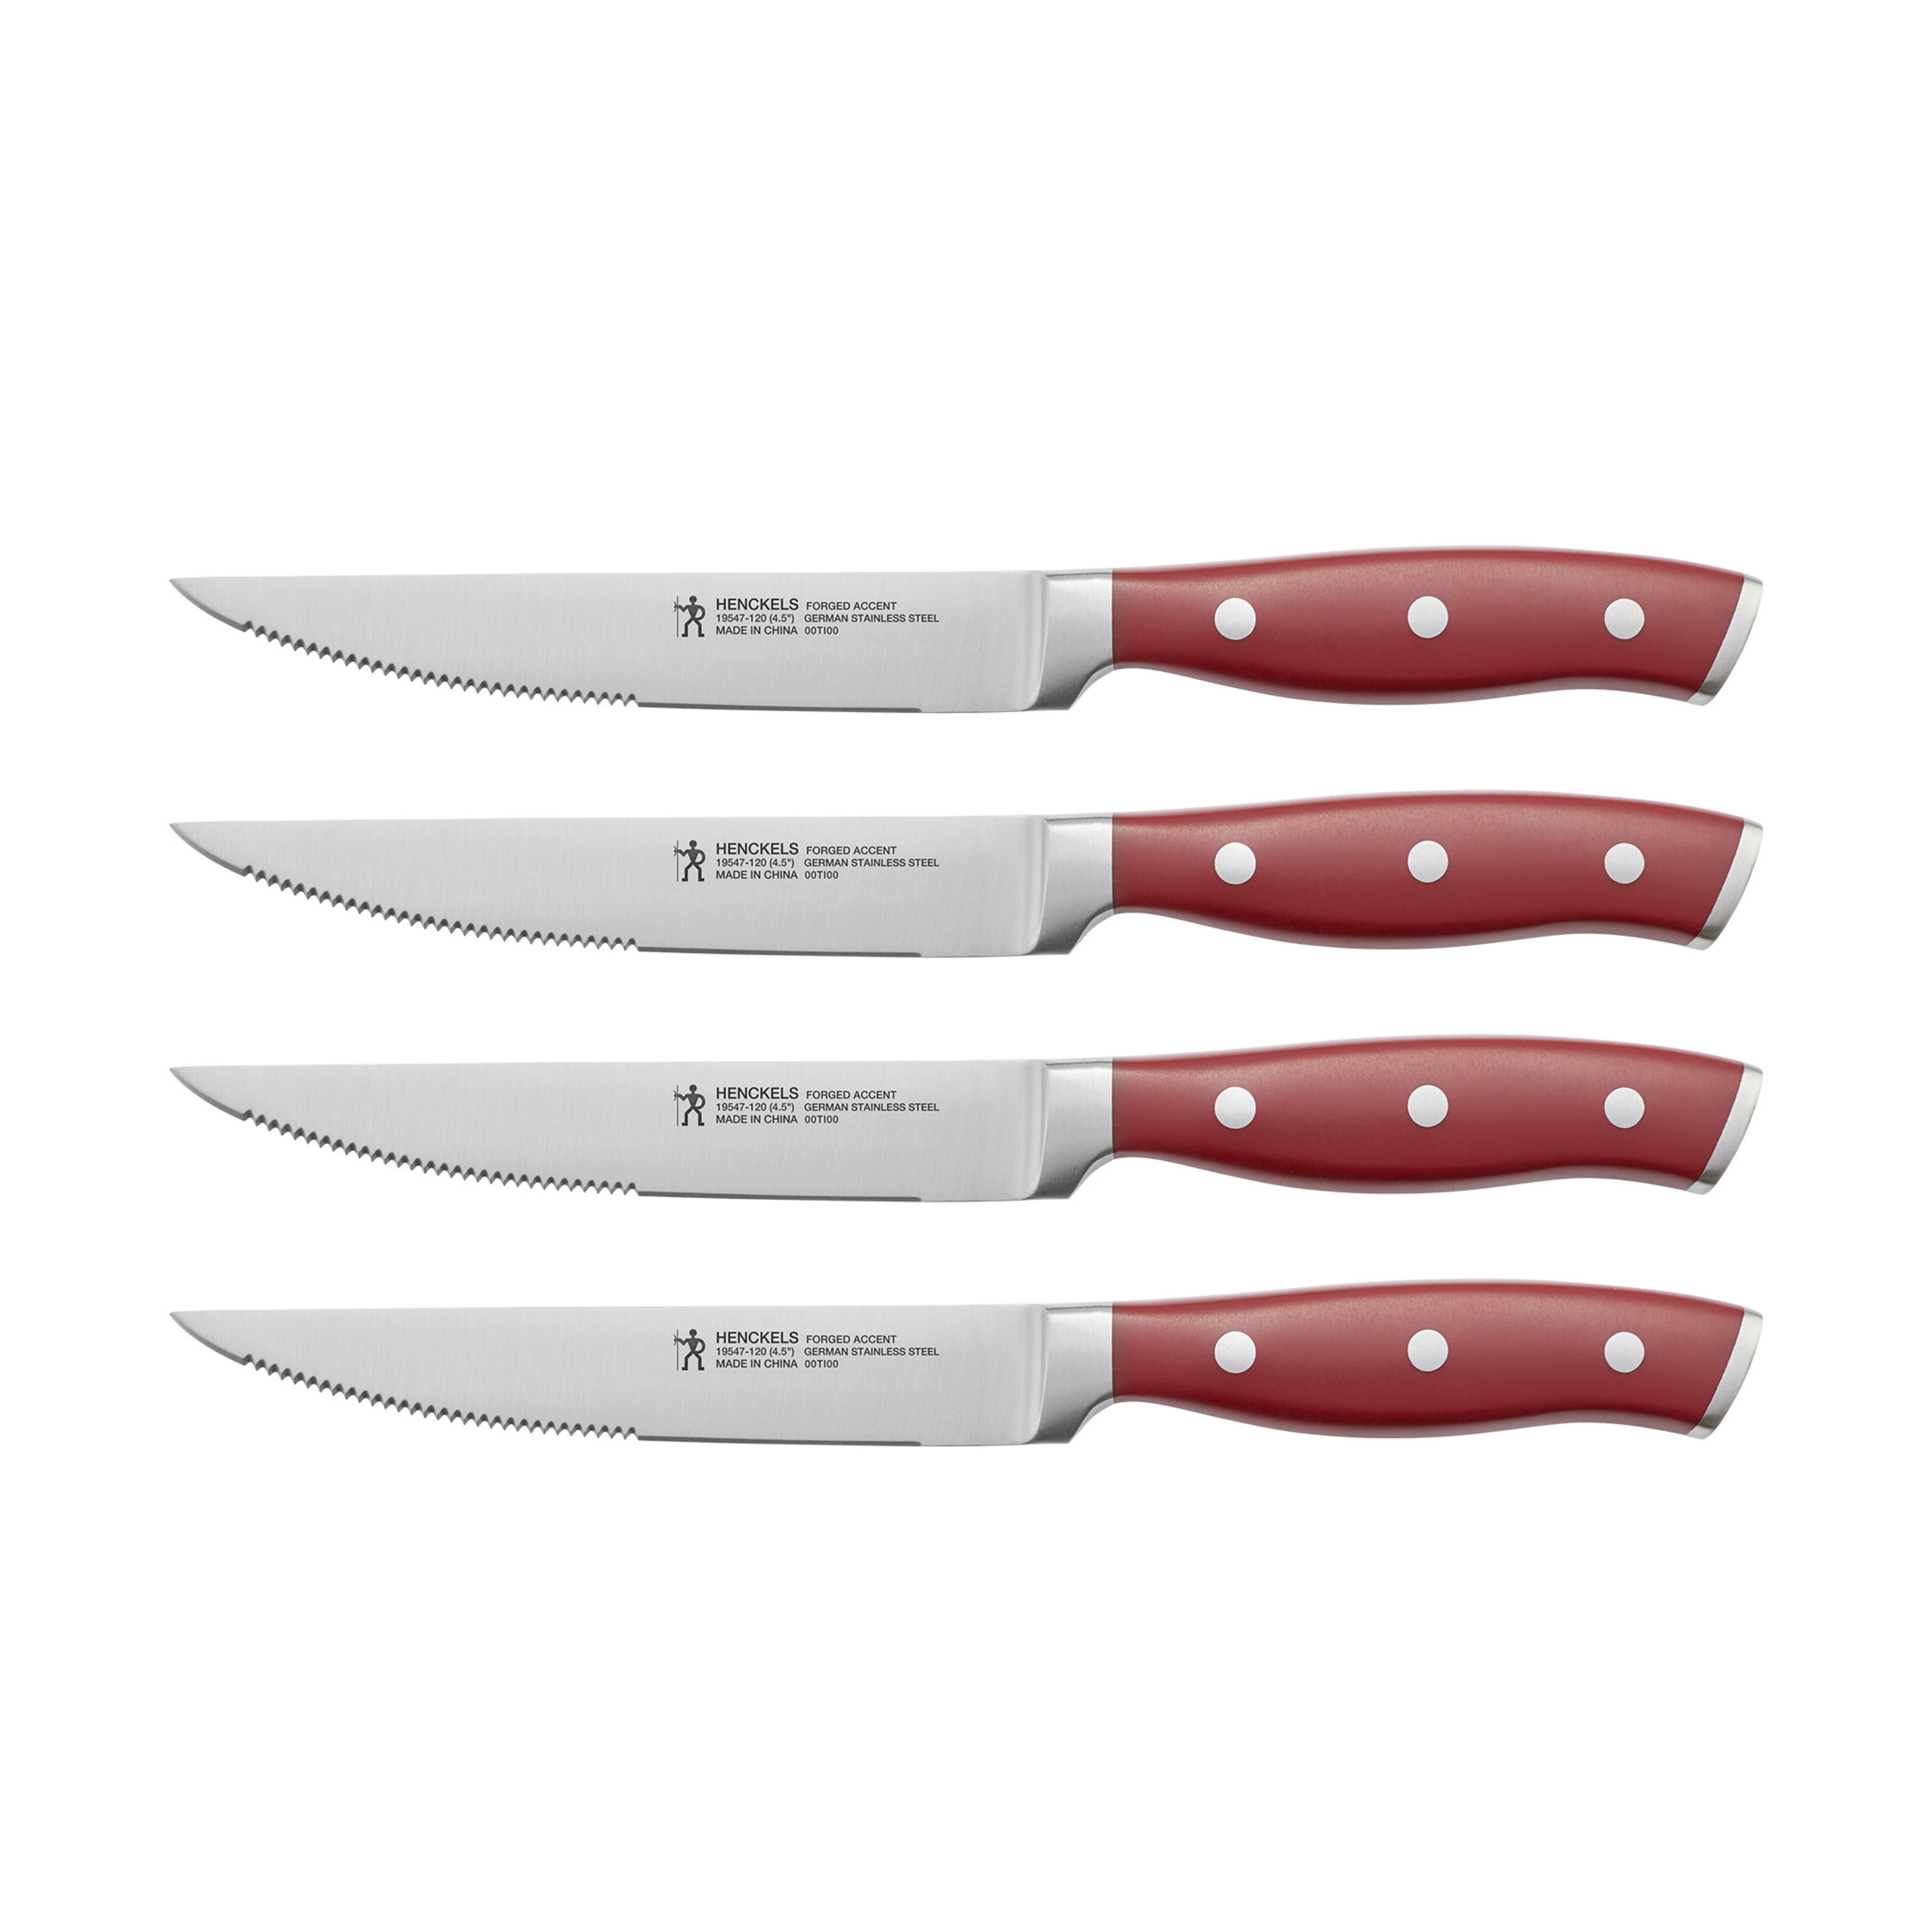 Henckels Statement Razor-Sharp 20-Piece Knife Set with Block, Chef Knife, Bread Knife, German Engineered Knife Informed by Over 100 Years of Mastery